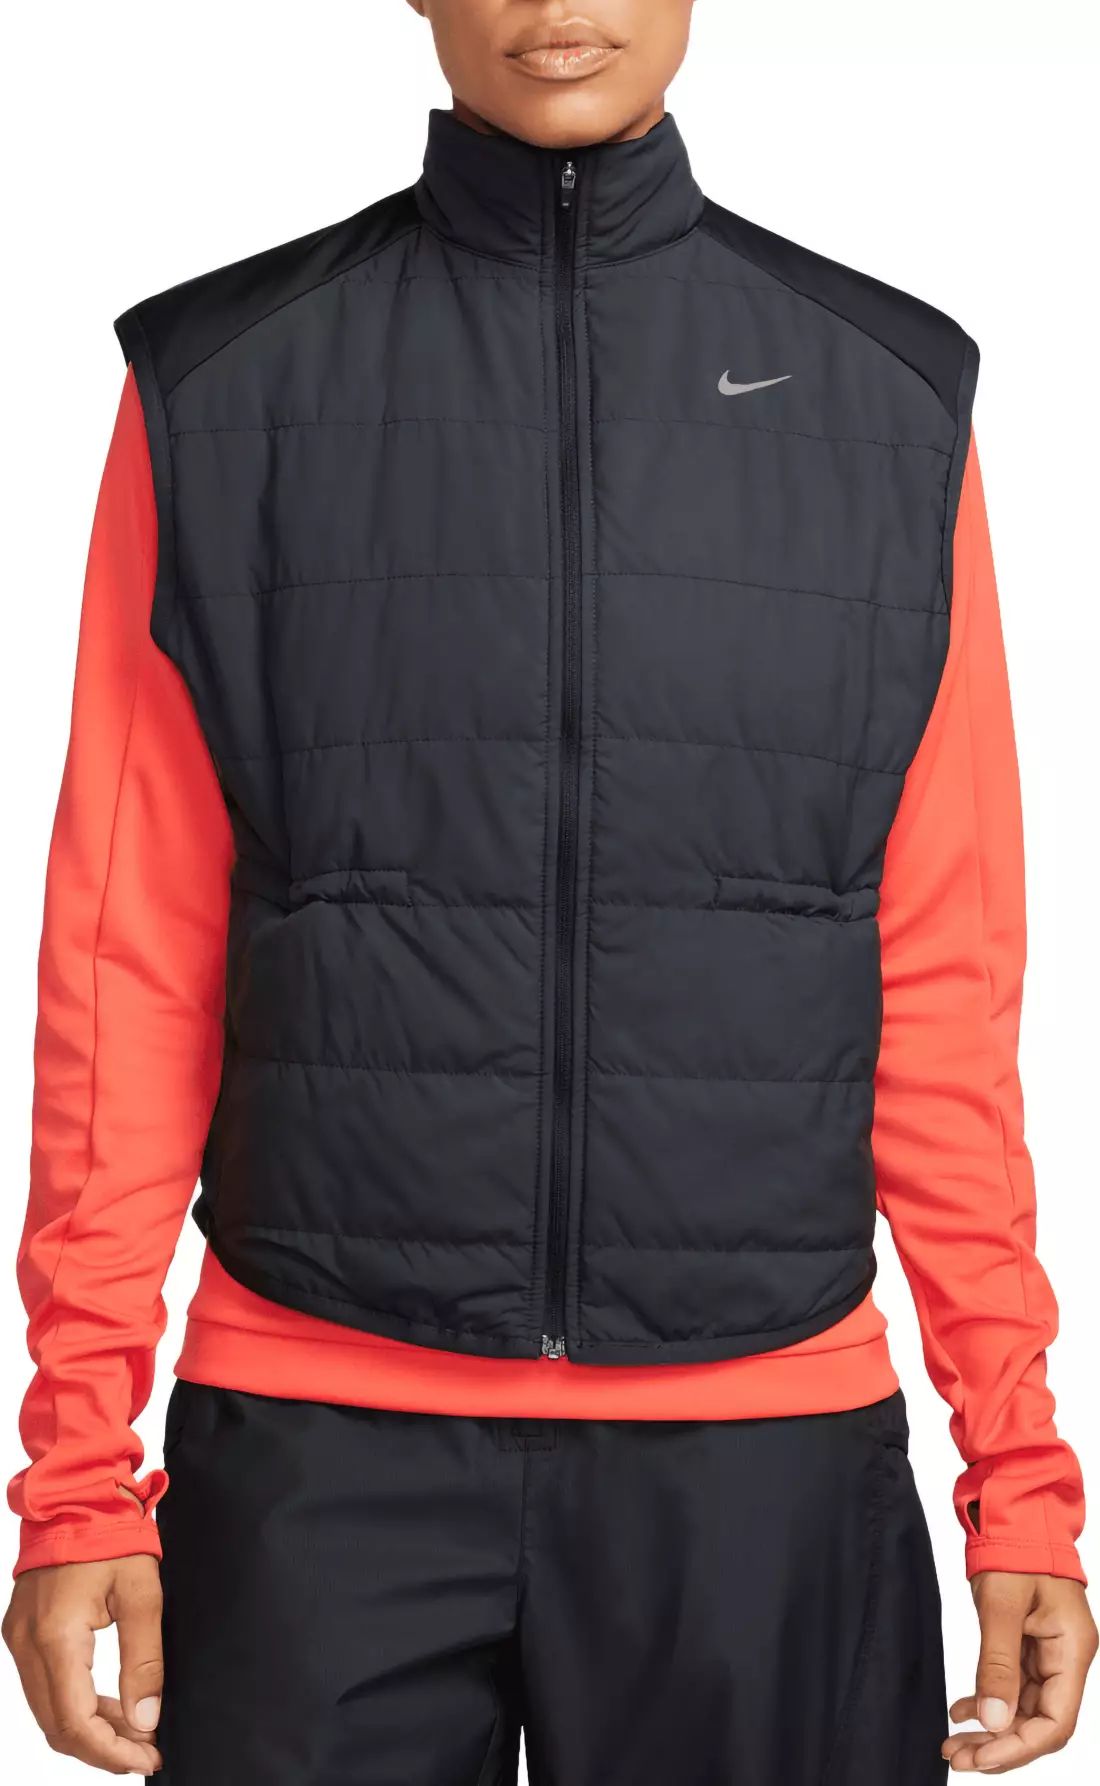 Nike Women's Therma-FIT Swift Running Vest | Dick's Sporting Goods